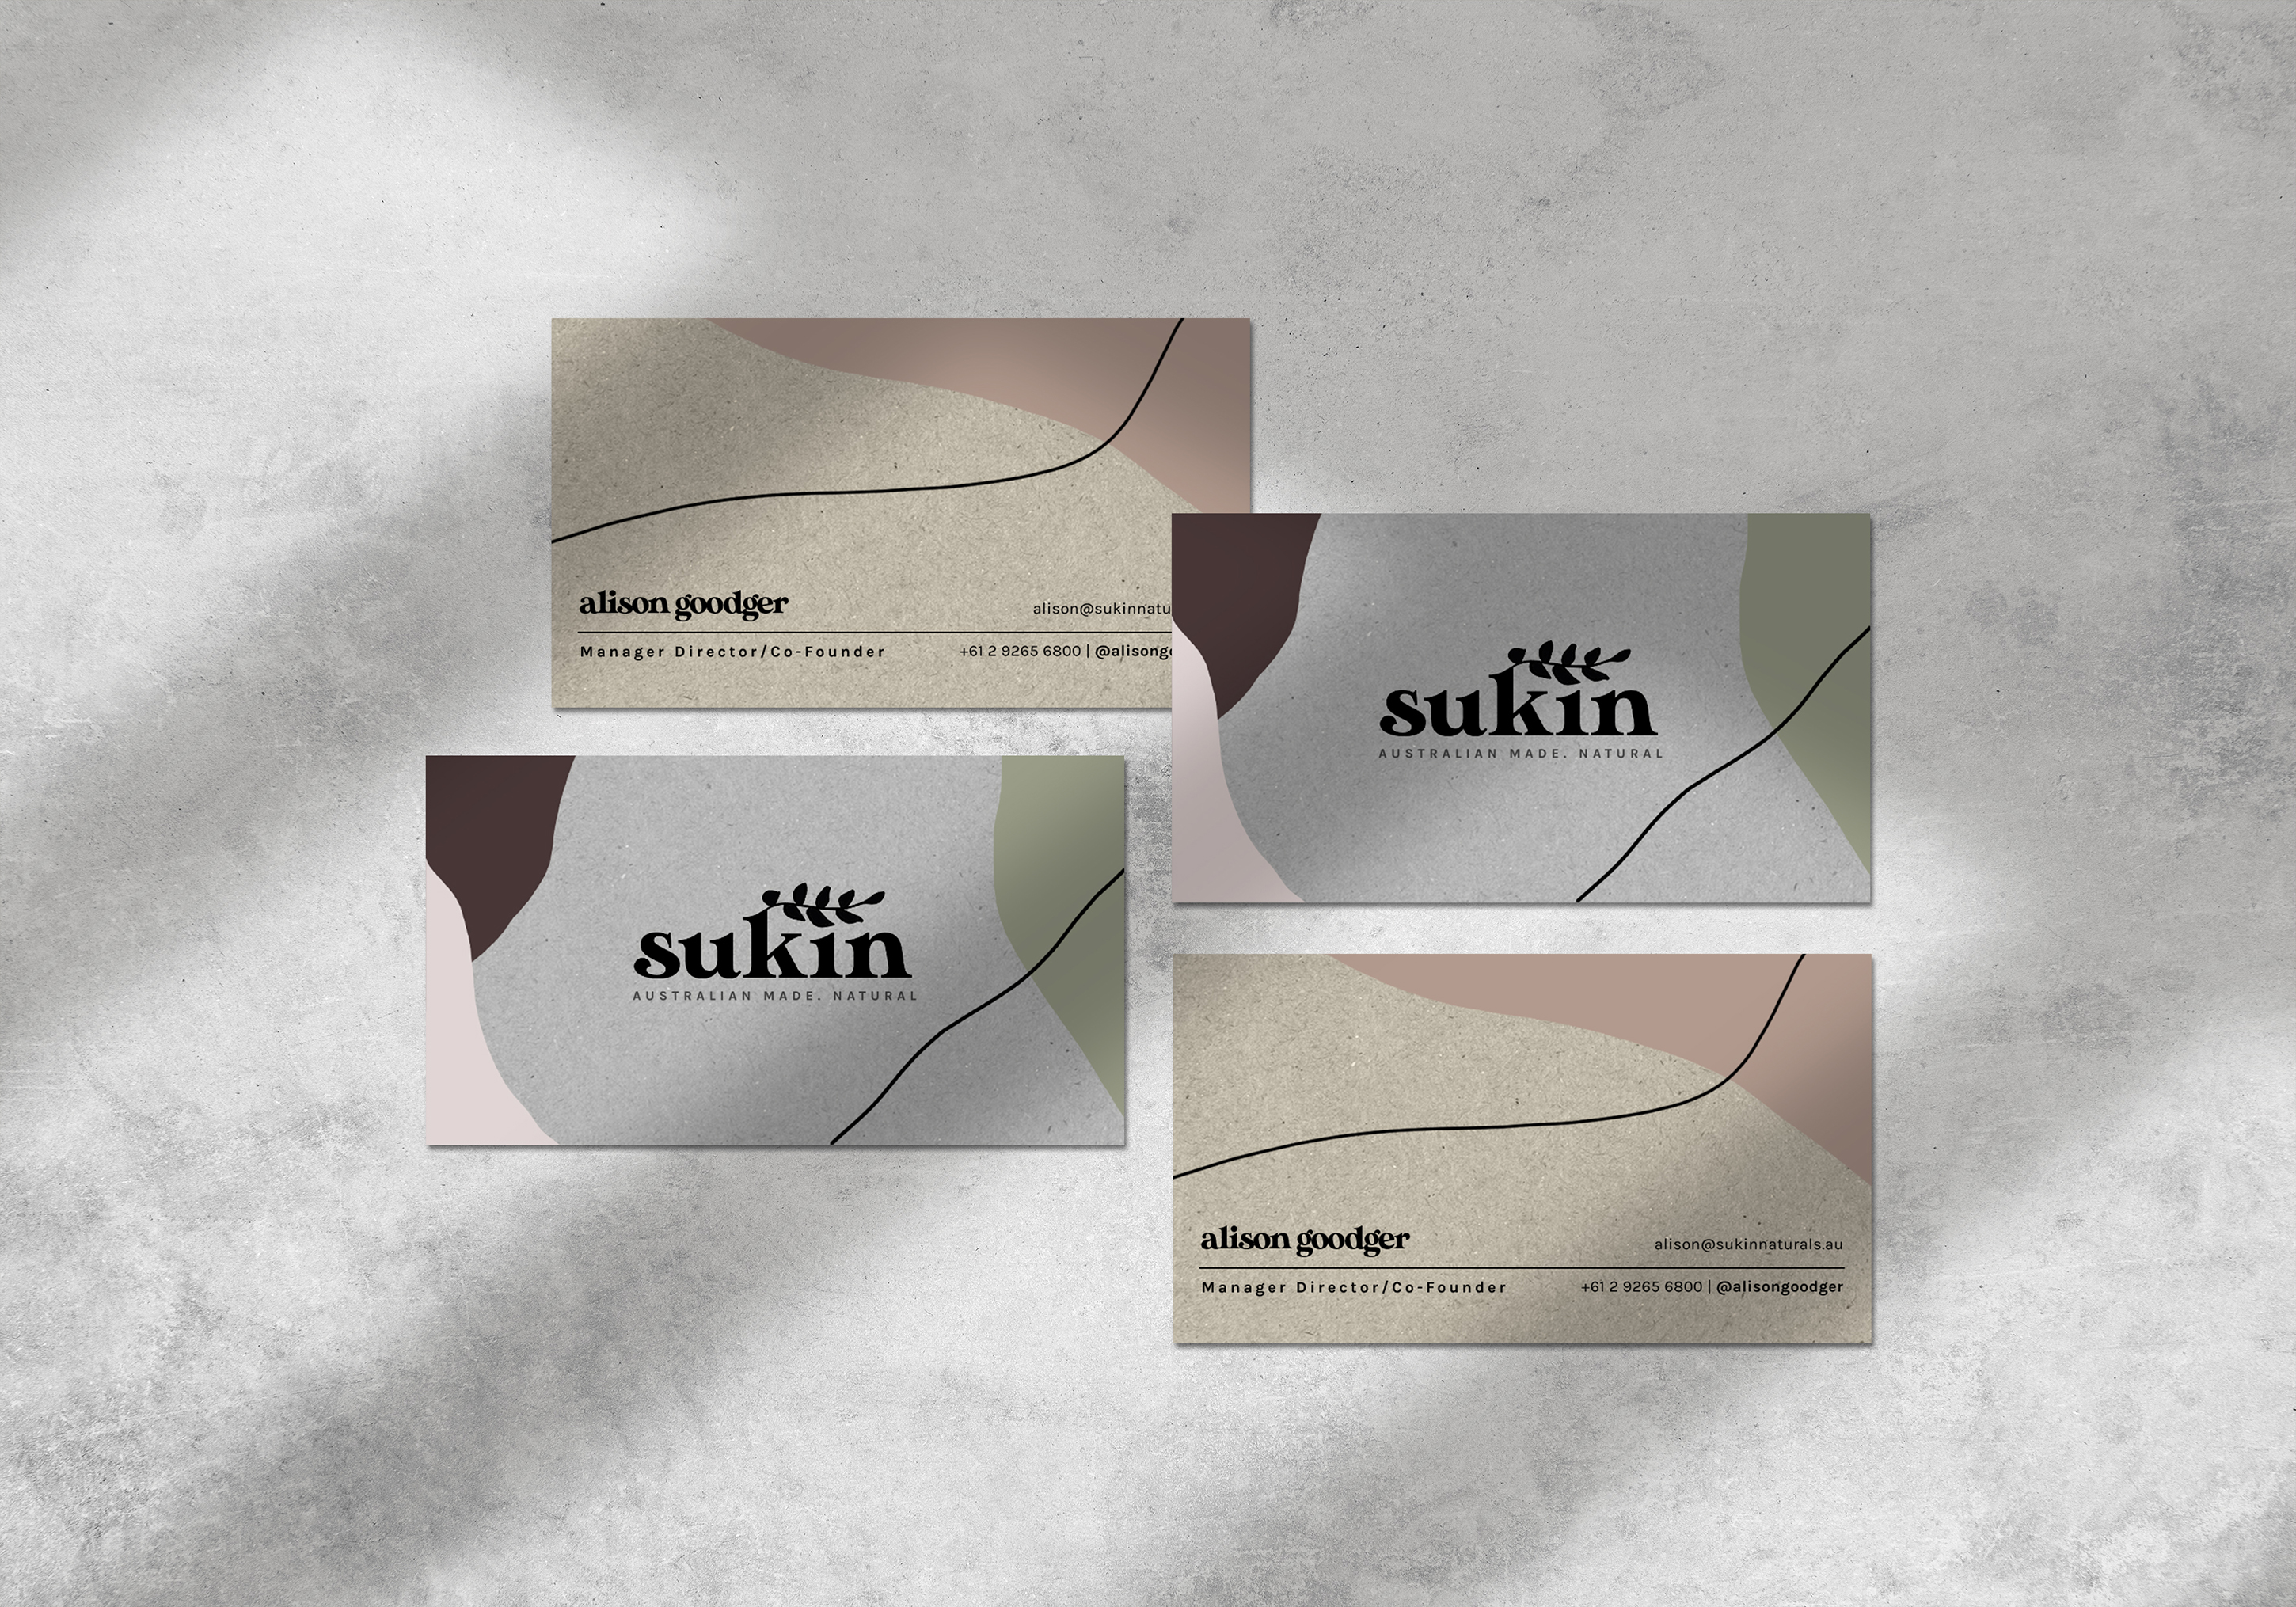 The front and back of a Sukin business card